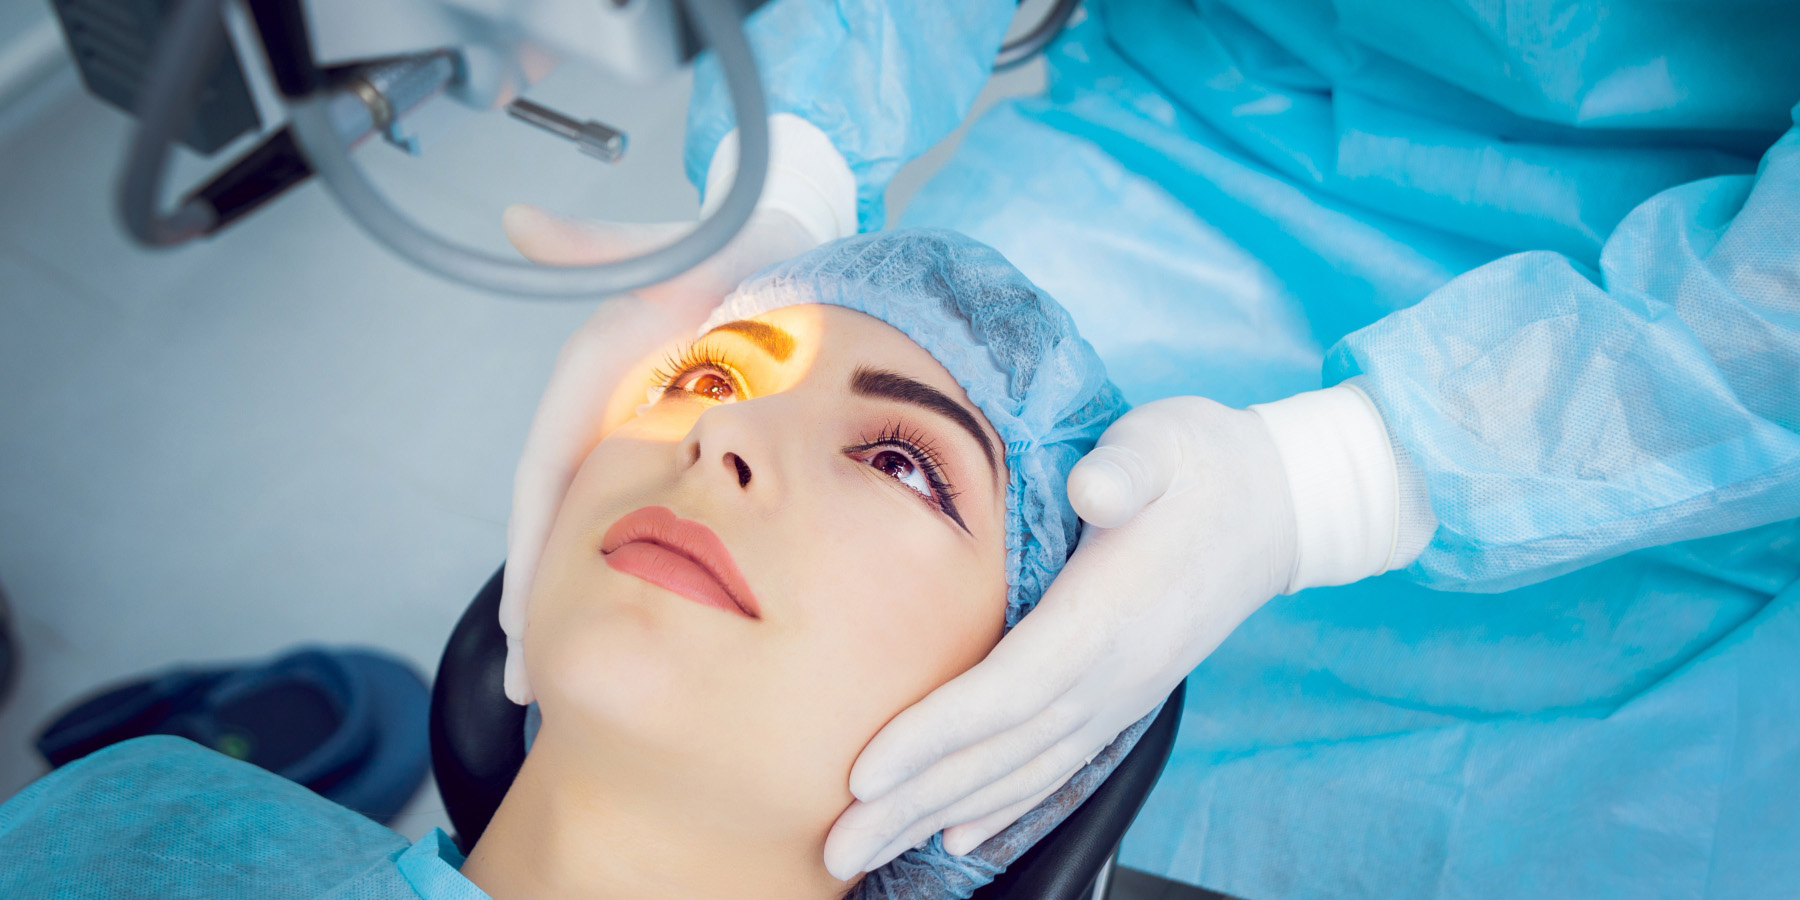 When should cataracts be removed?